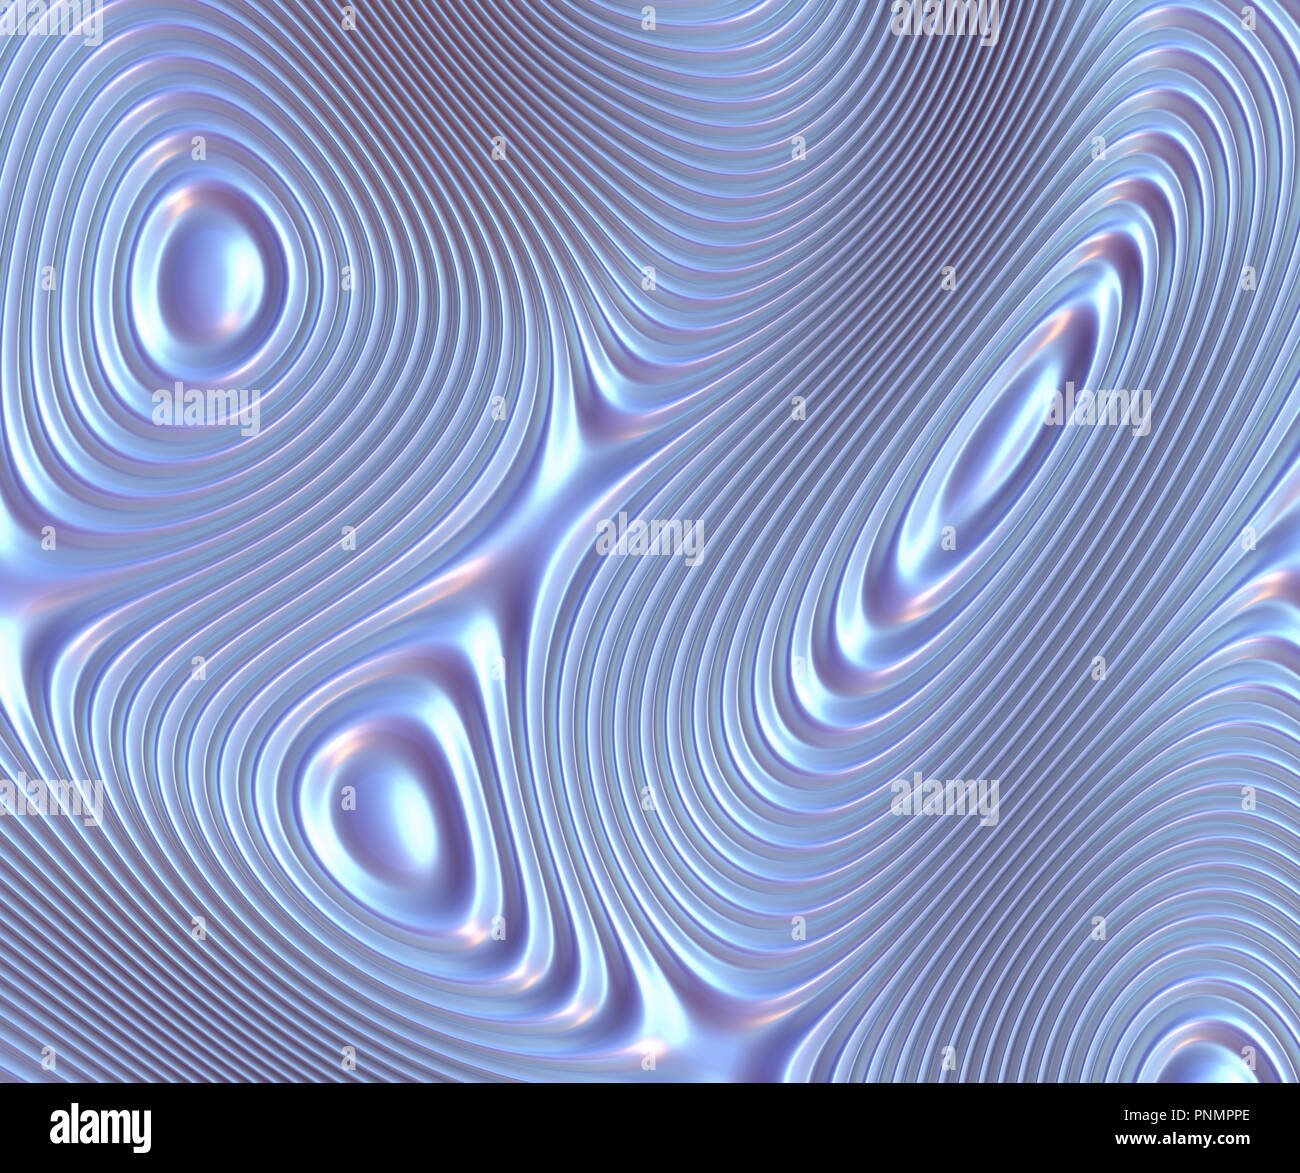 Abstract background with colored circles in the form of sound waves. Stock Photo